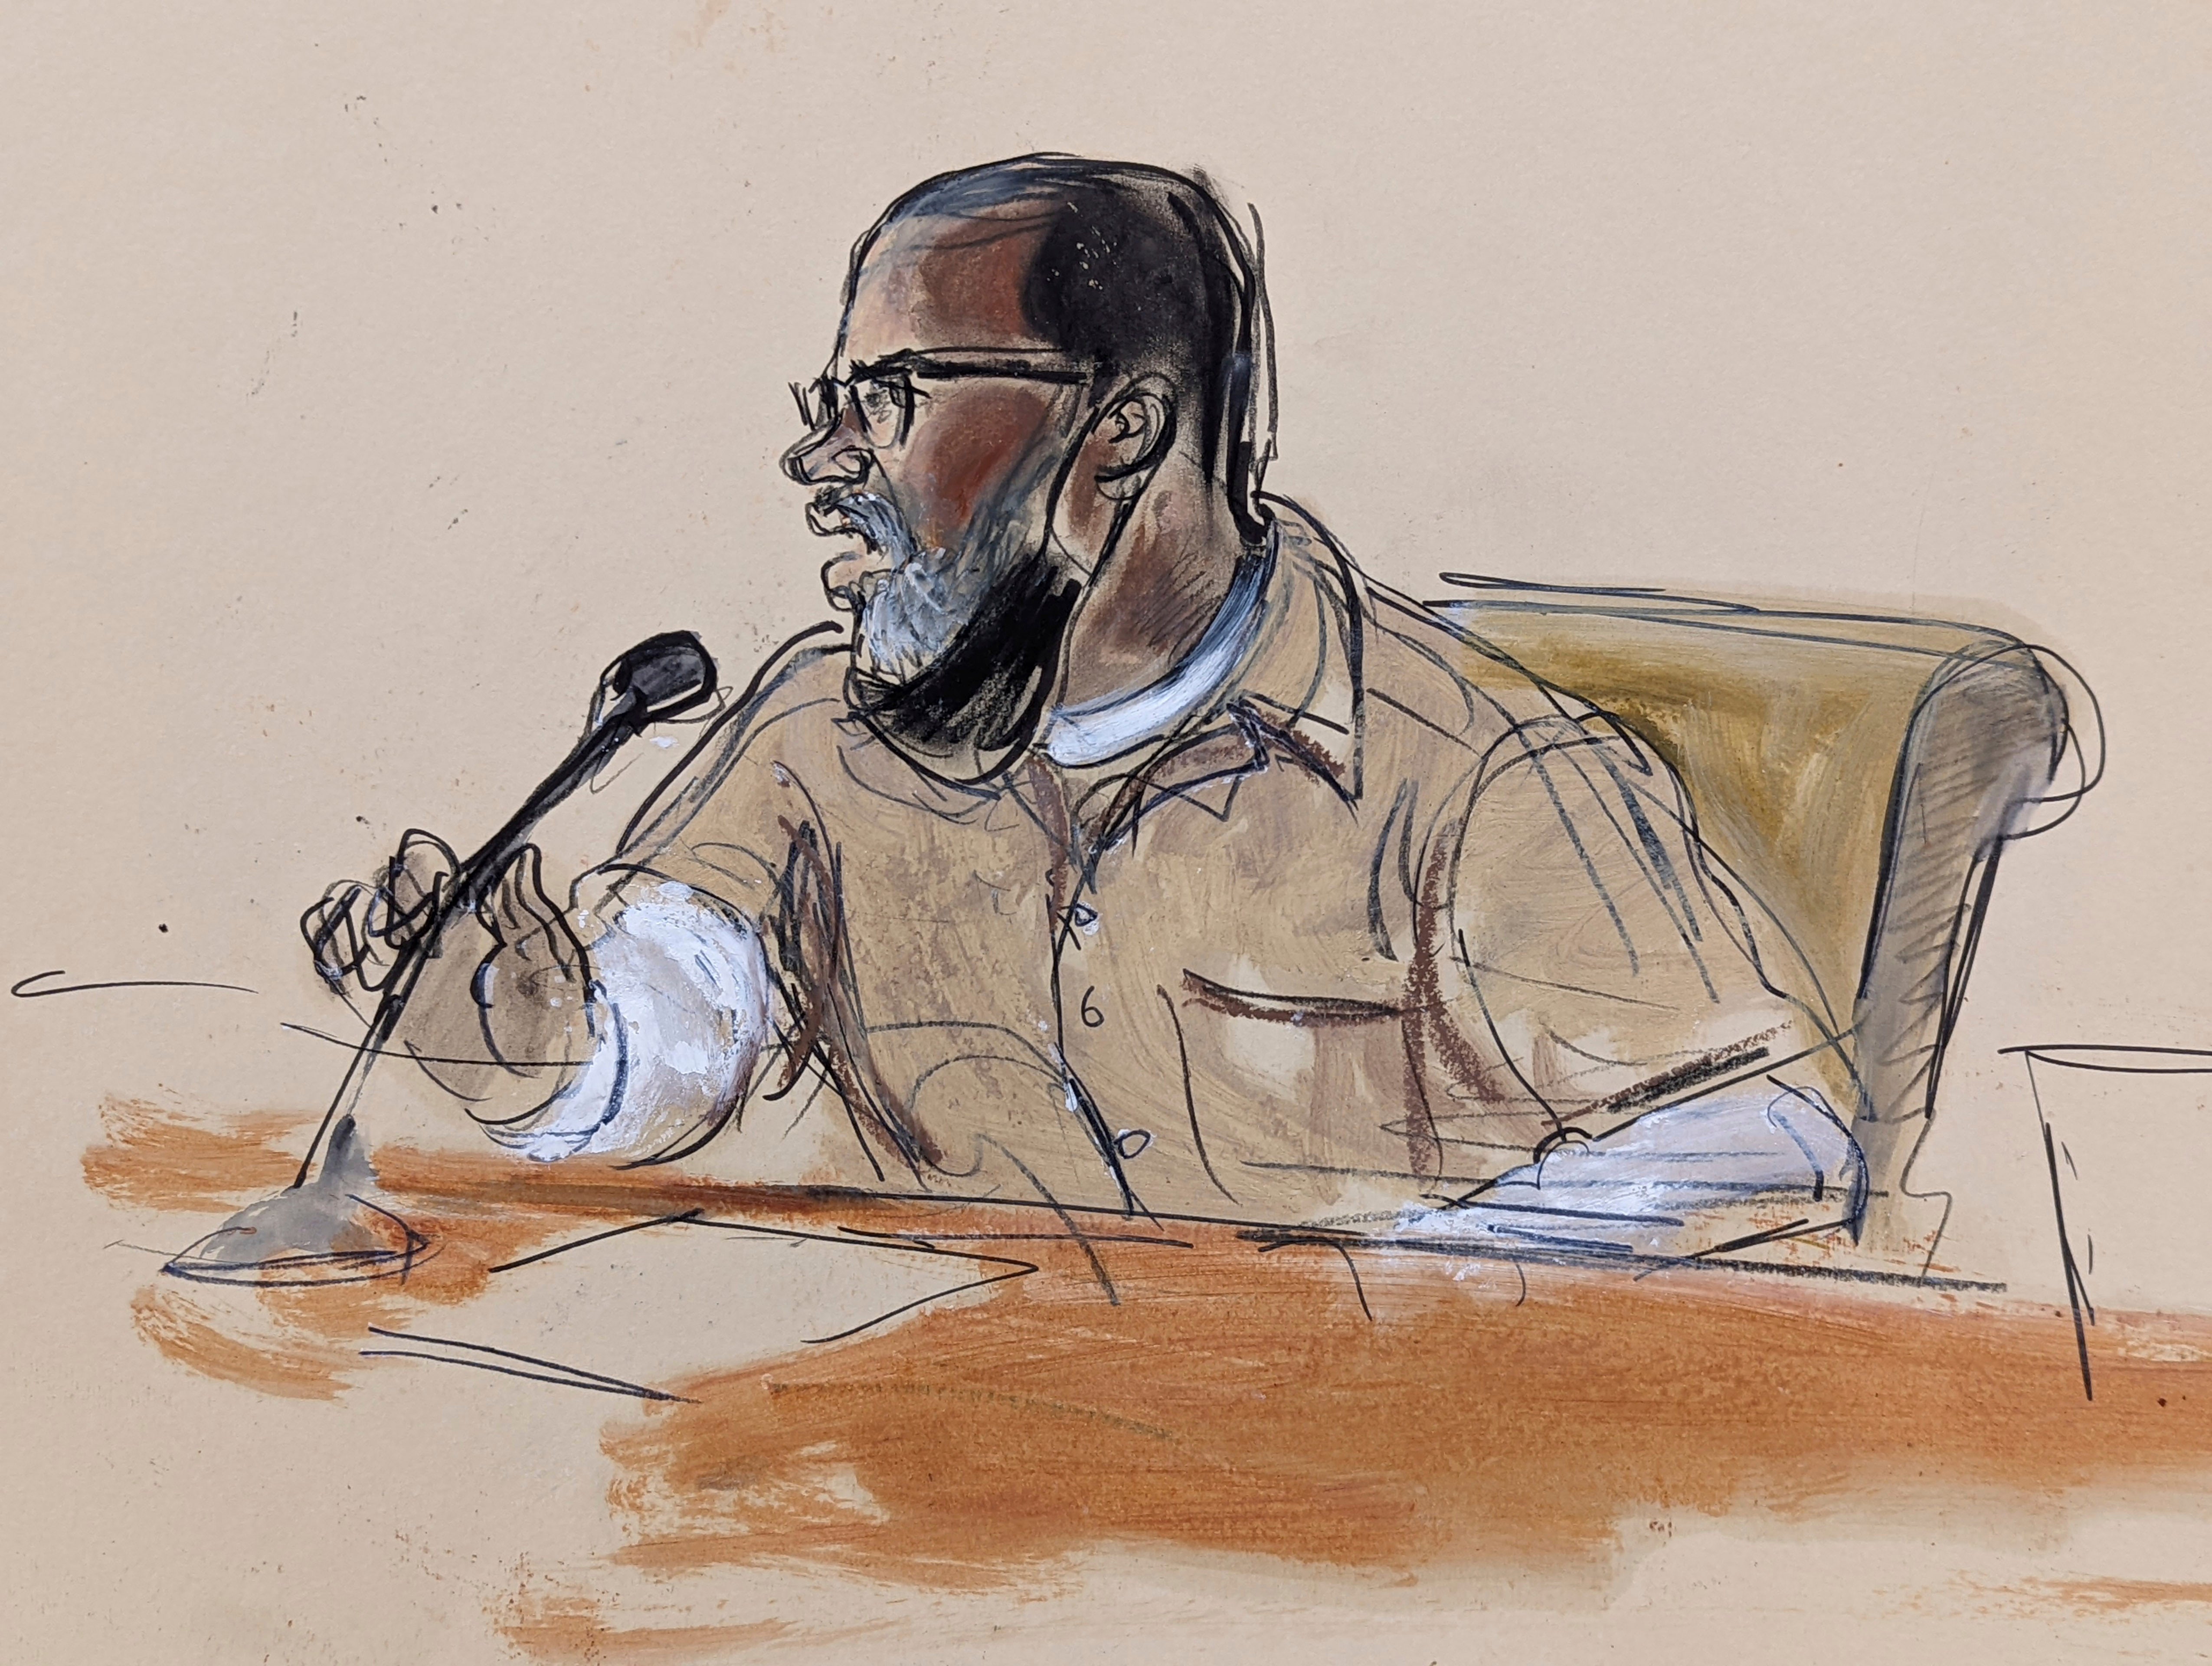 R Kelly, as depicted in a courtroom sketch